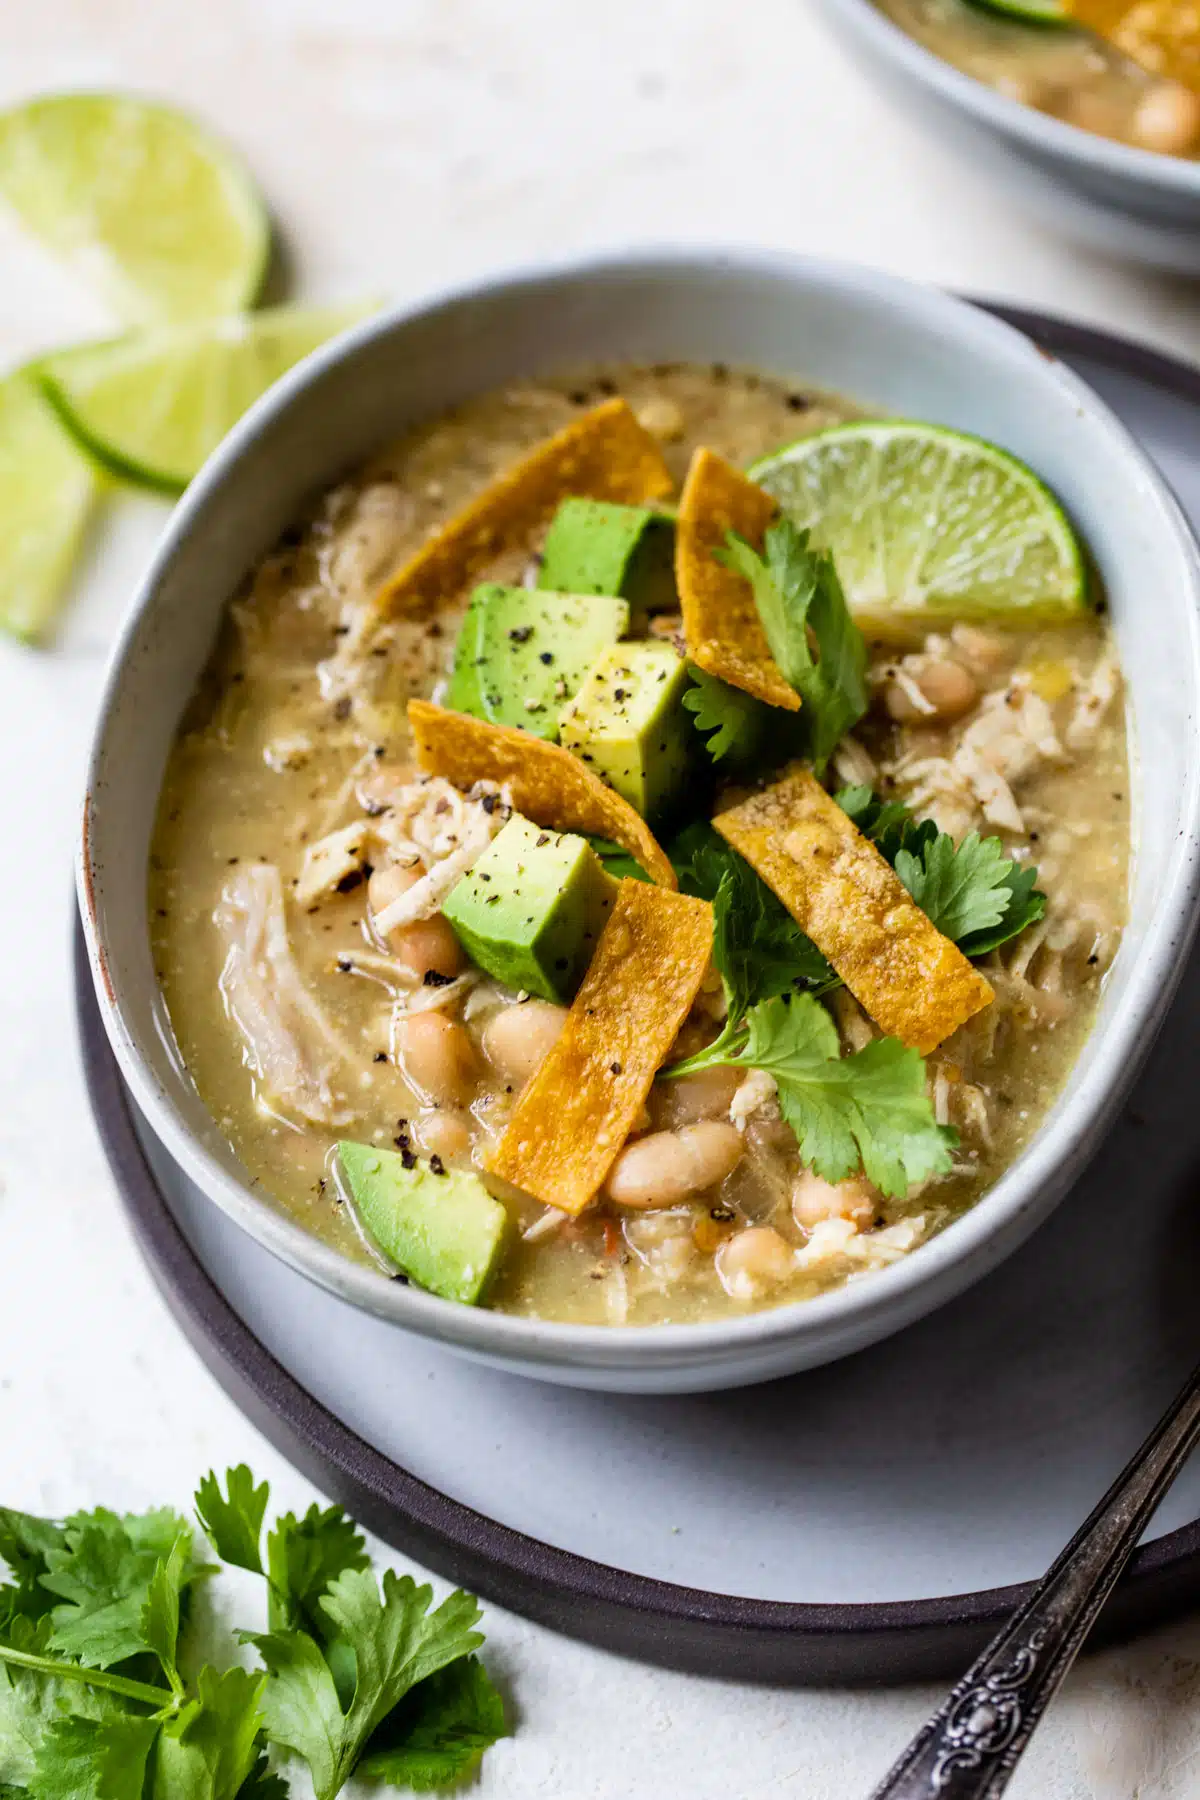 a bowl of soup on a plate filled with shredded chicken and beans and topped with diced avocado, cilantro and tortilla strips